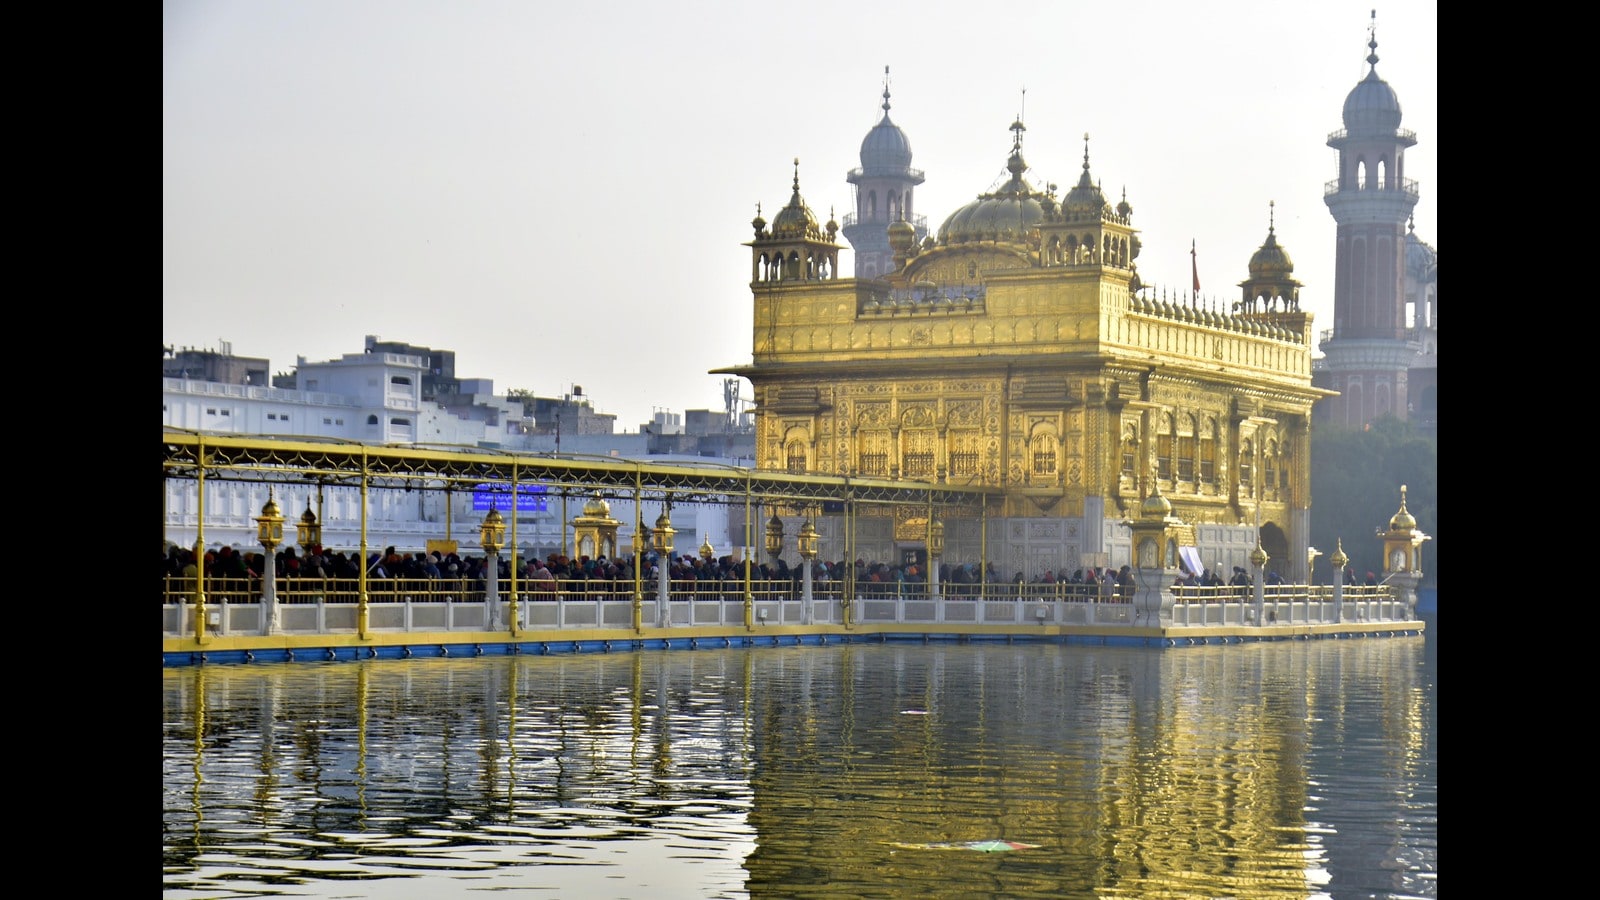 SGPC appoints five guides to help foreign, domestic tourists at Golden  Temple - Hindustan Times